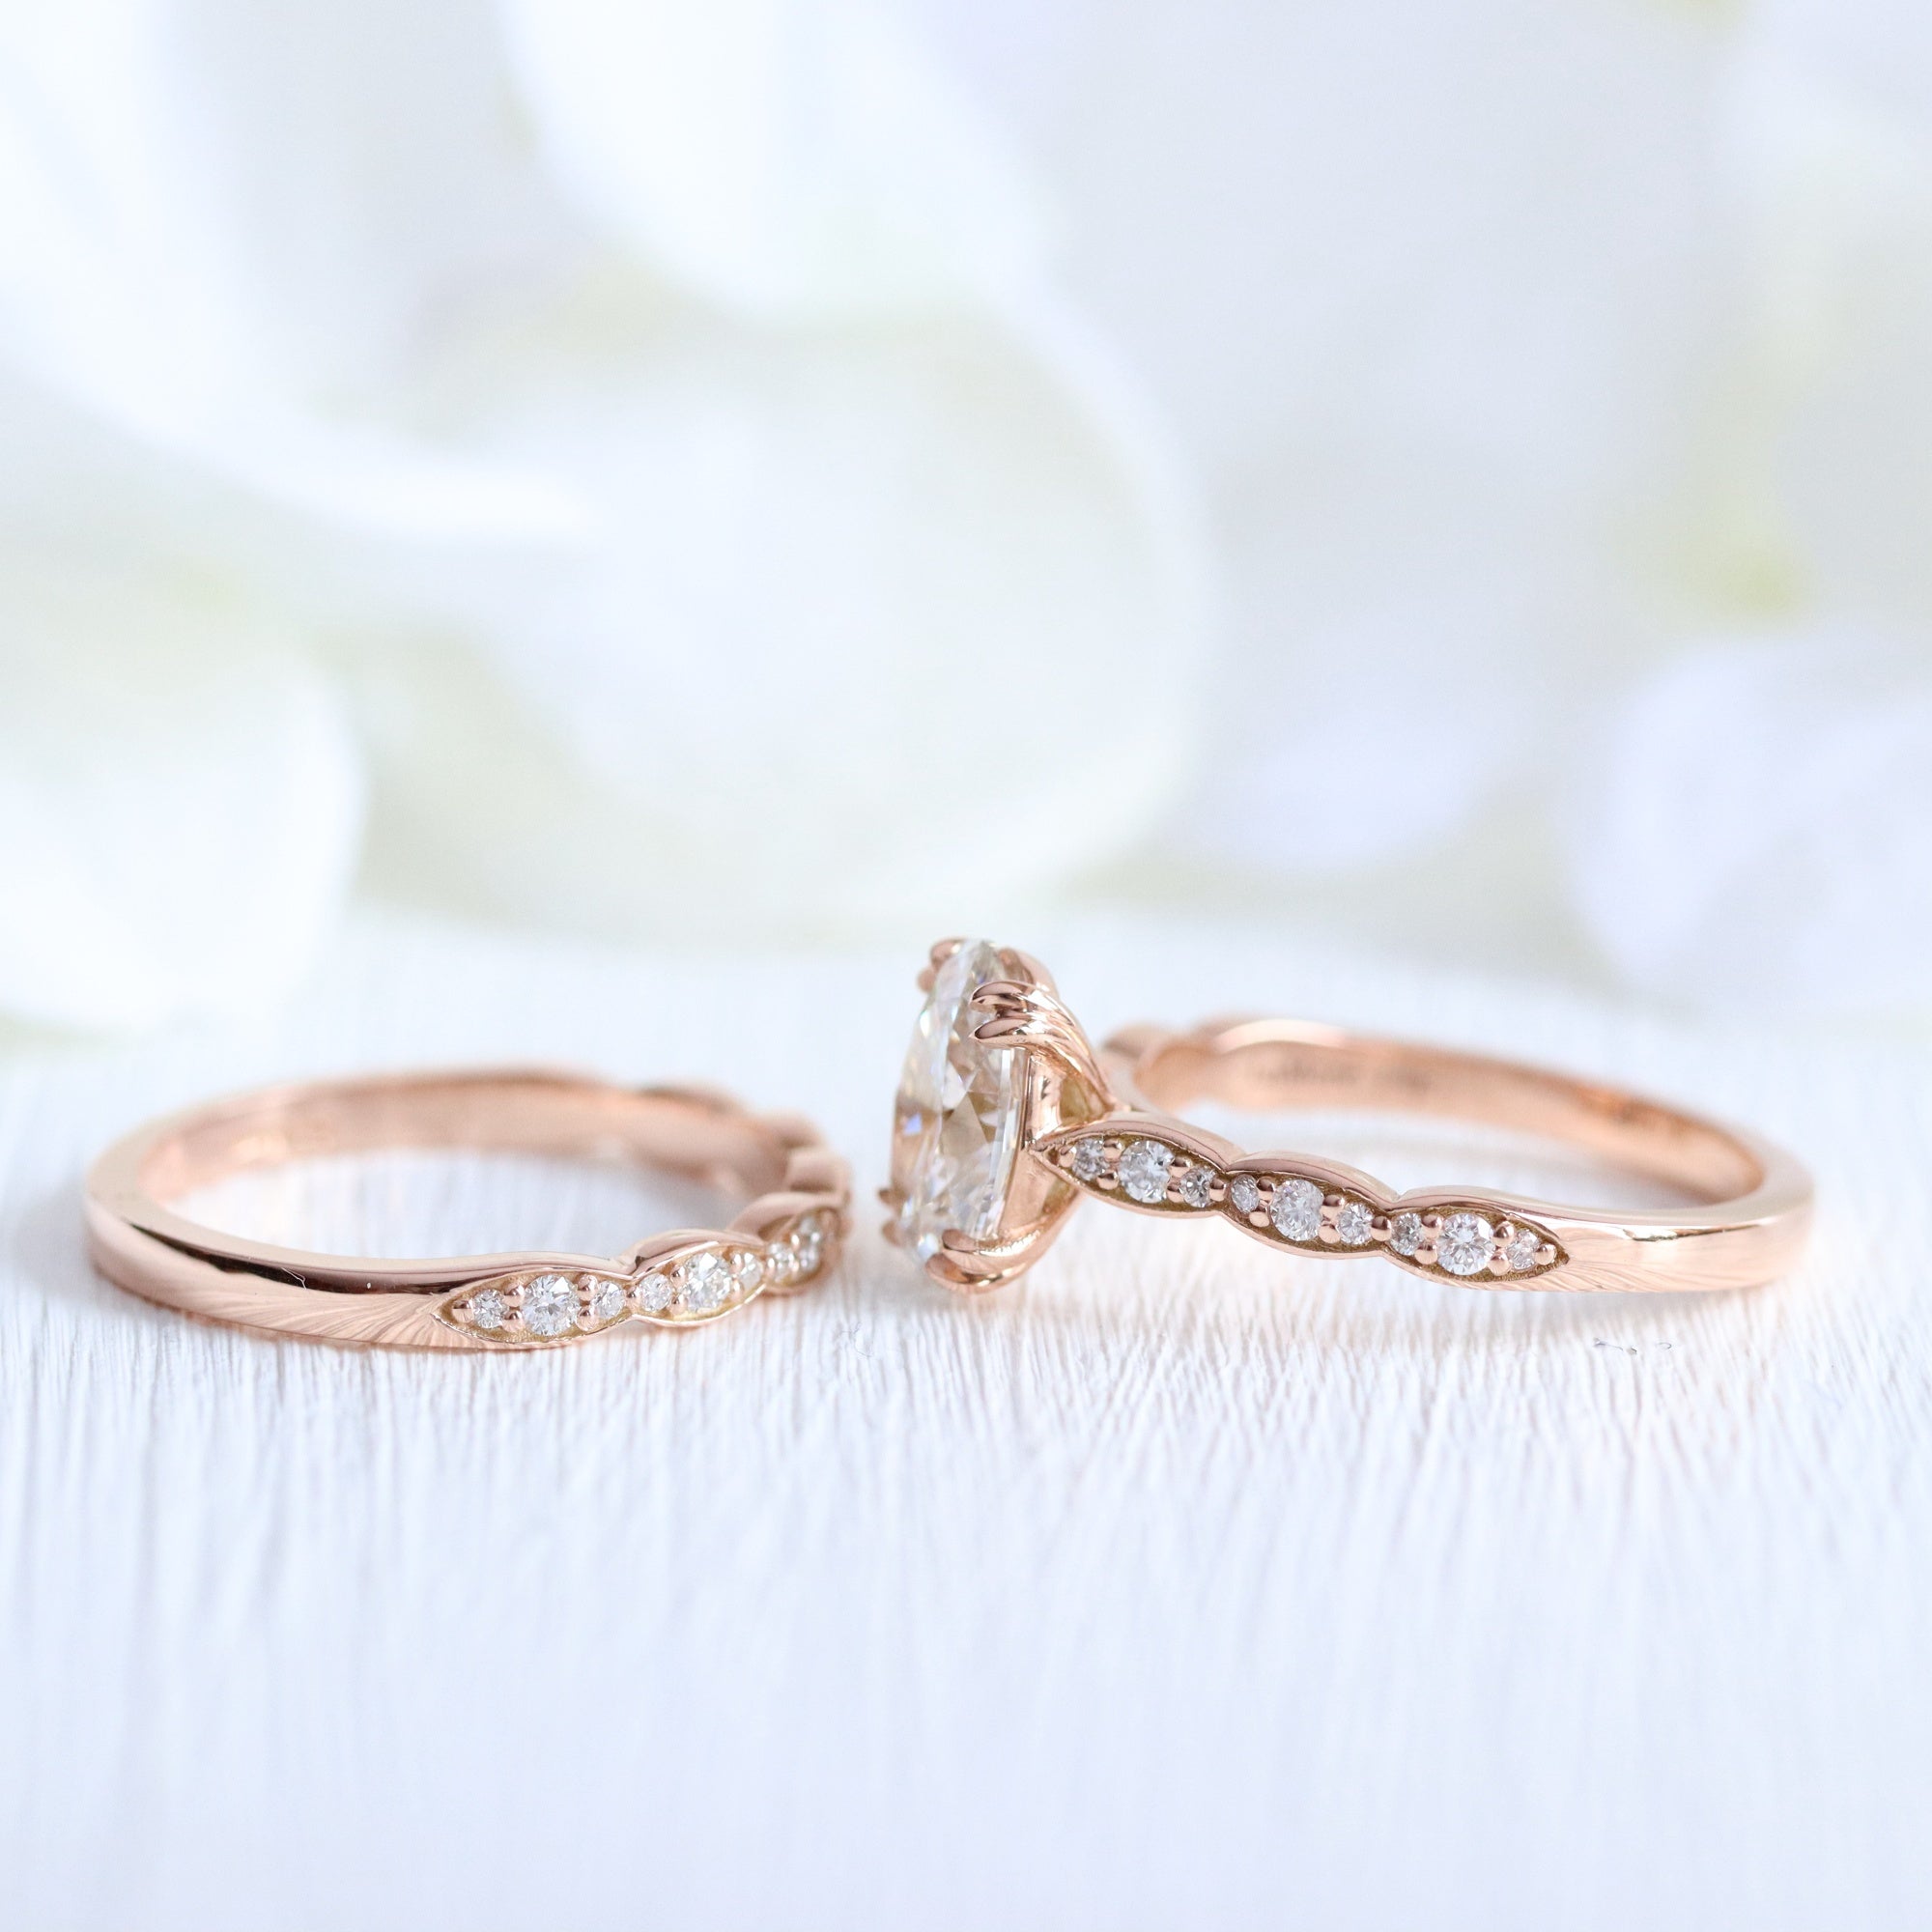 Large Oval Lab Diamond Ring Bridal Set Rose Gold Solitaire Ring Stack La More Design picture